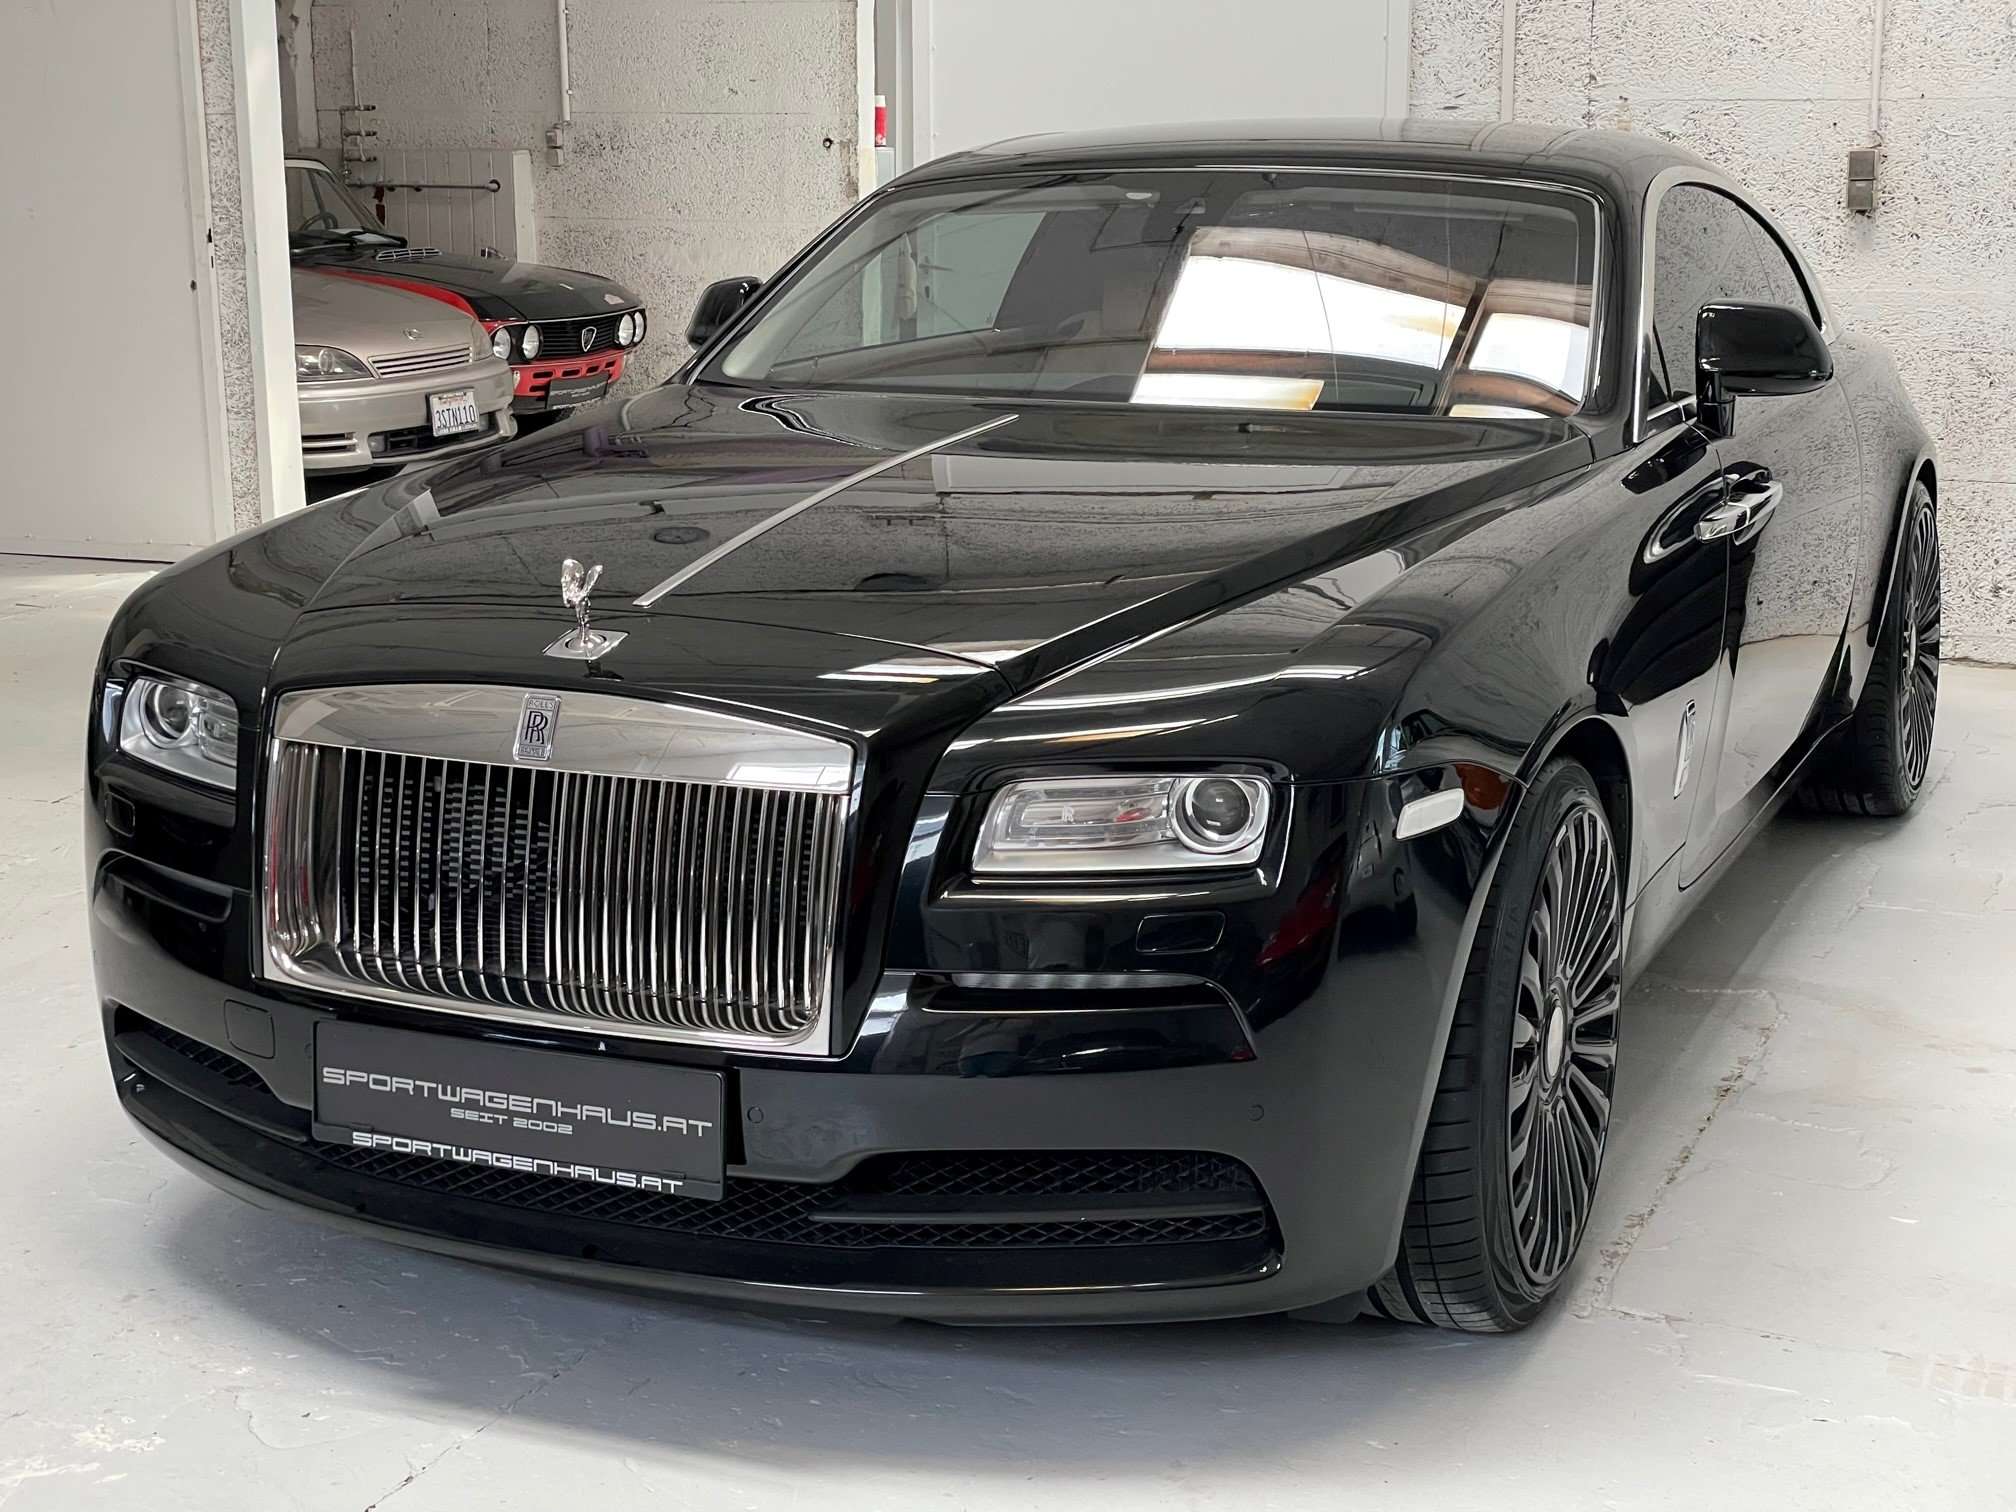 Rolls-Royce Wraith Coupe in Black used in Linz for € 319,900.-